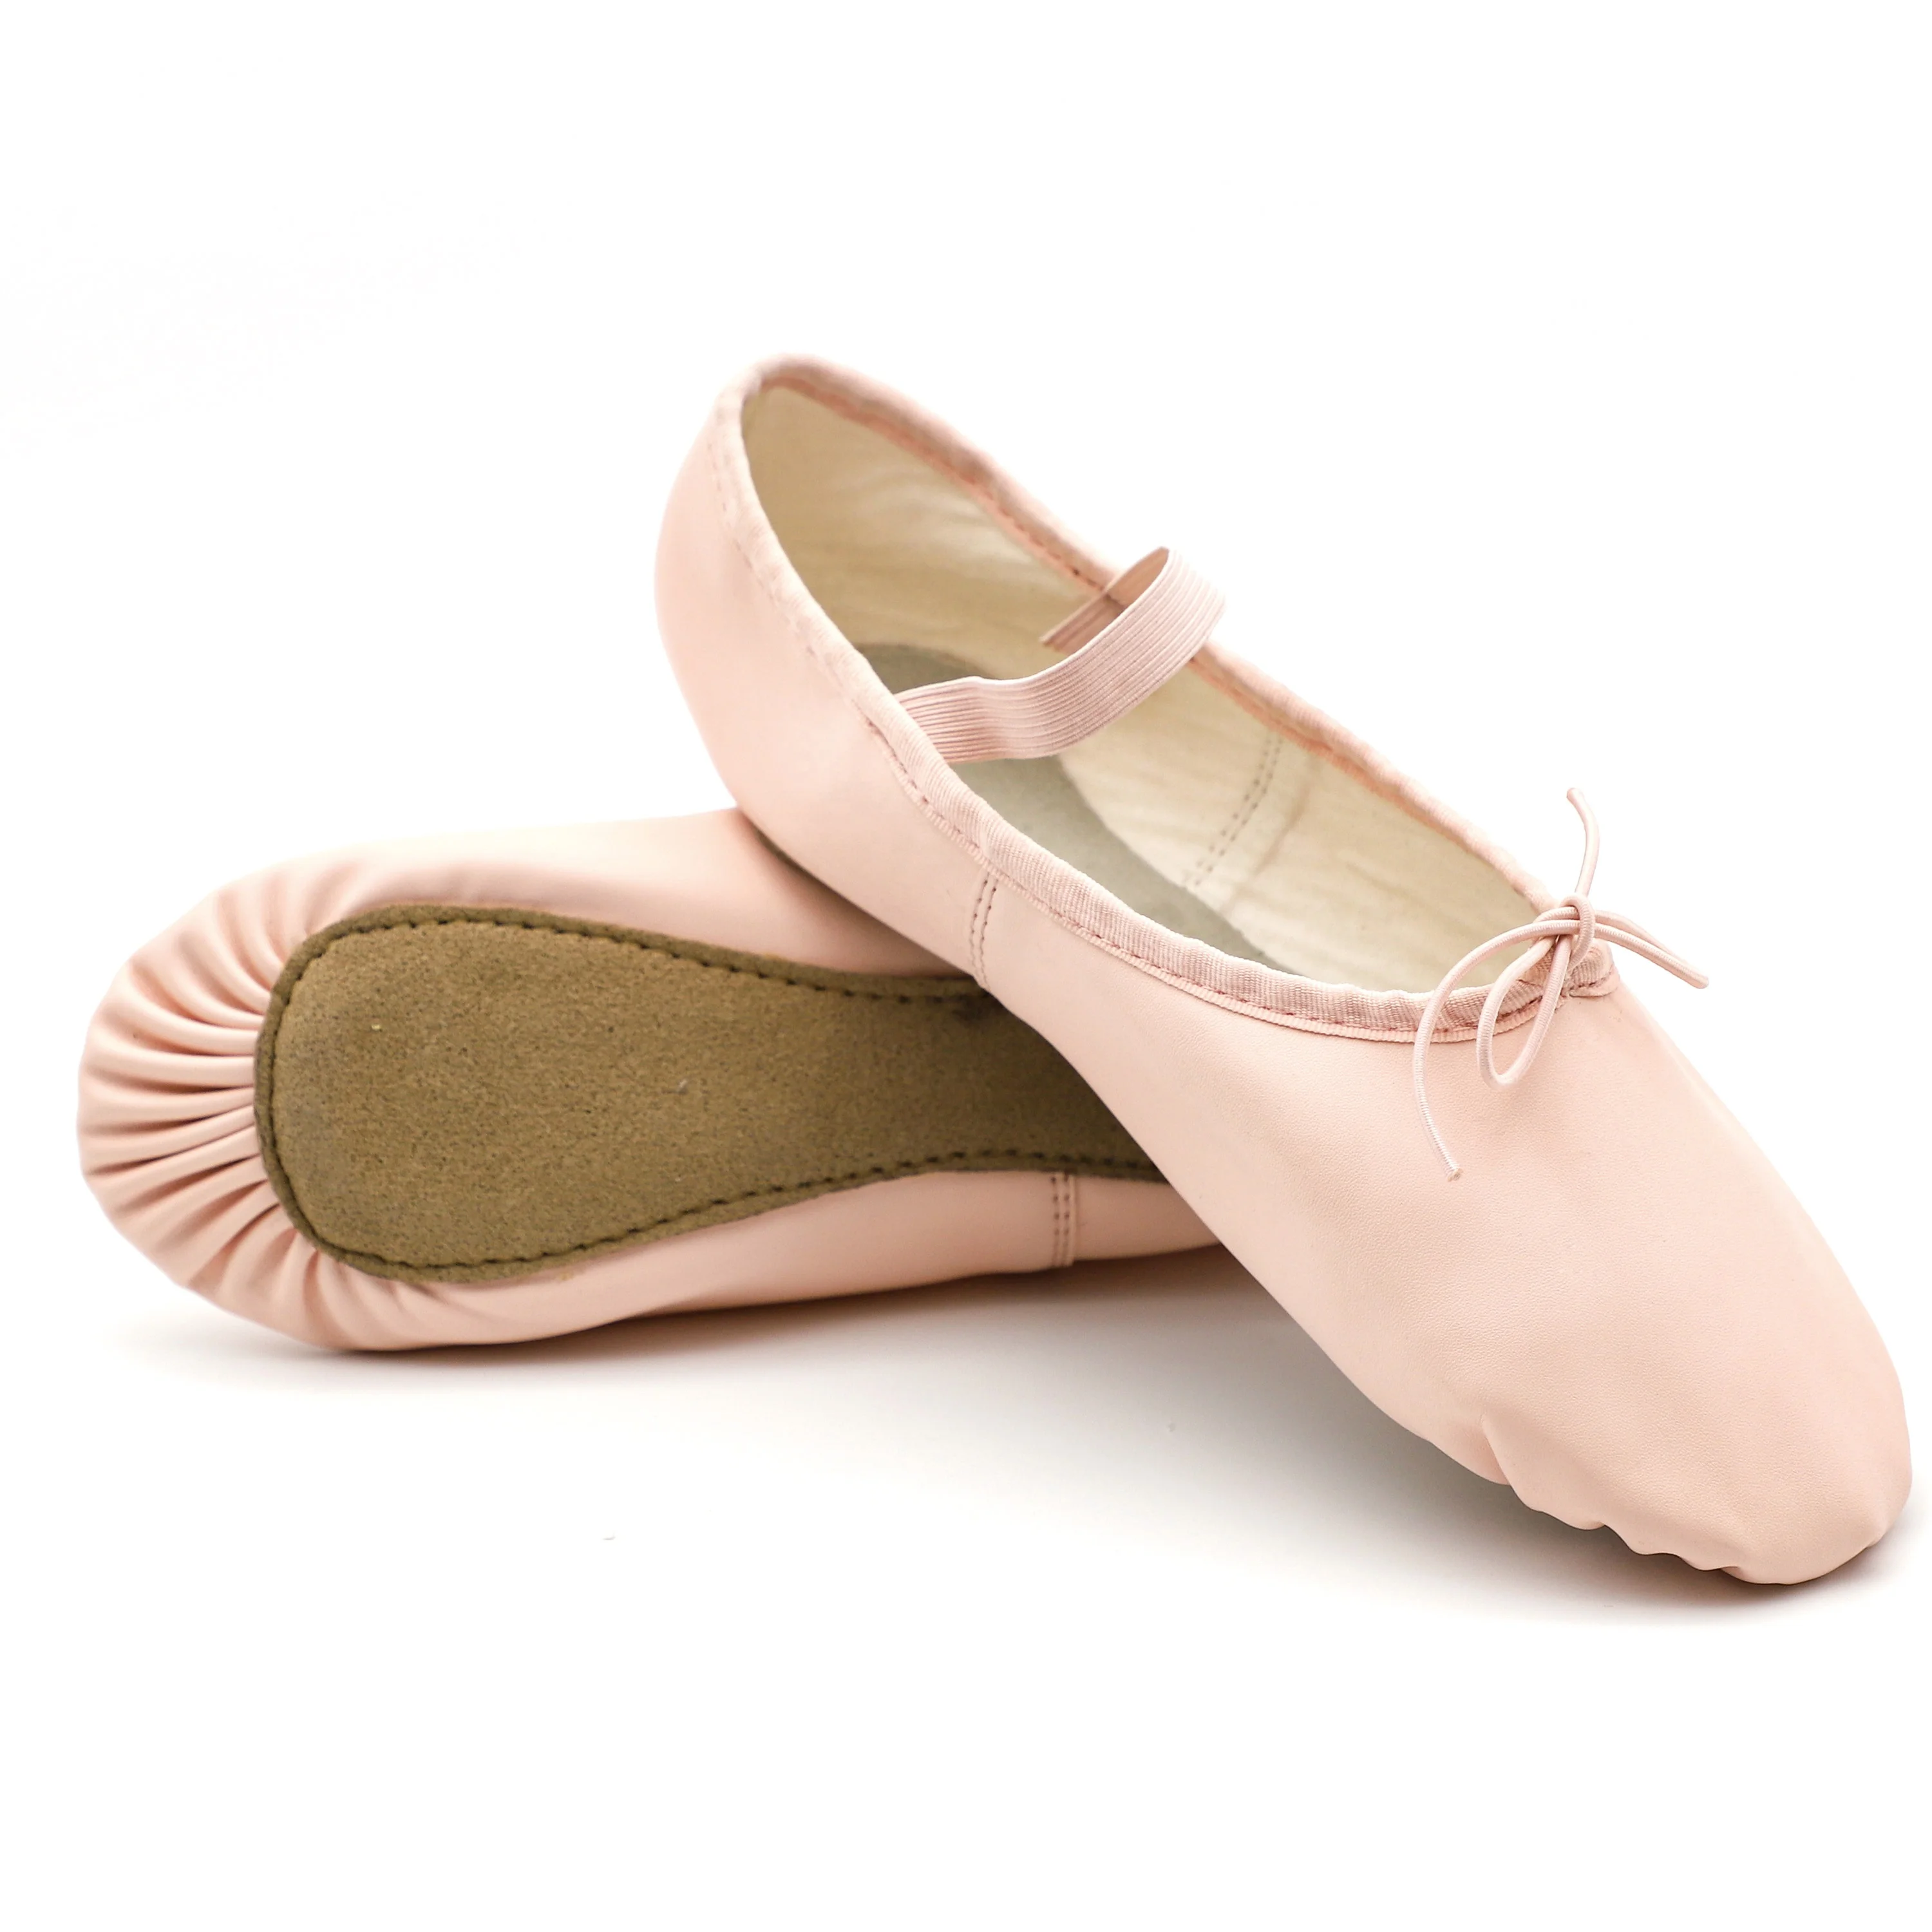 

Genuine Leather Ballet Shoes/Ballet Slippers/Dance Shoes for Women and Girls with Anti-slip Suede Sole Cotton Lining, Pink,nude,black